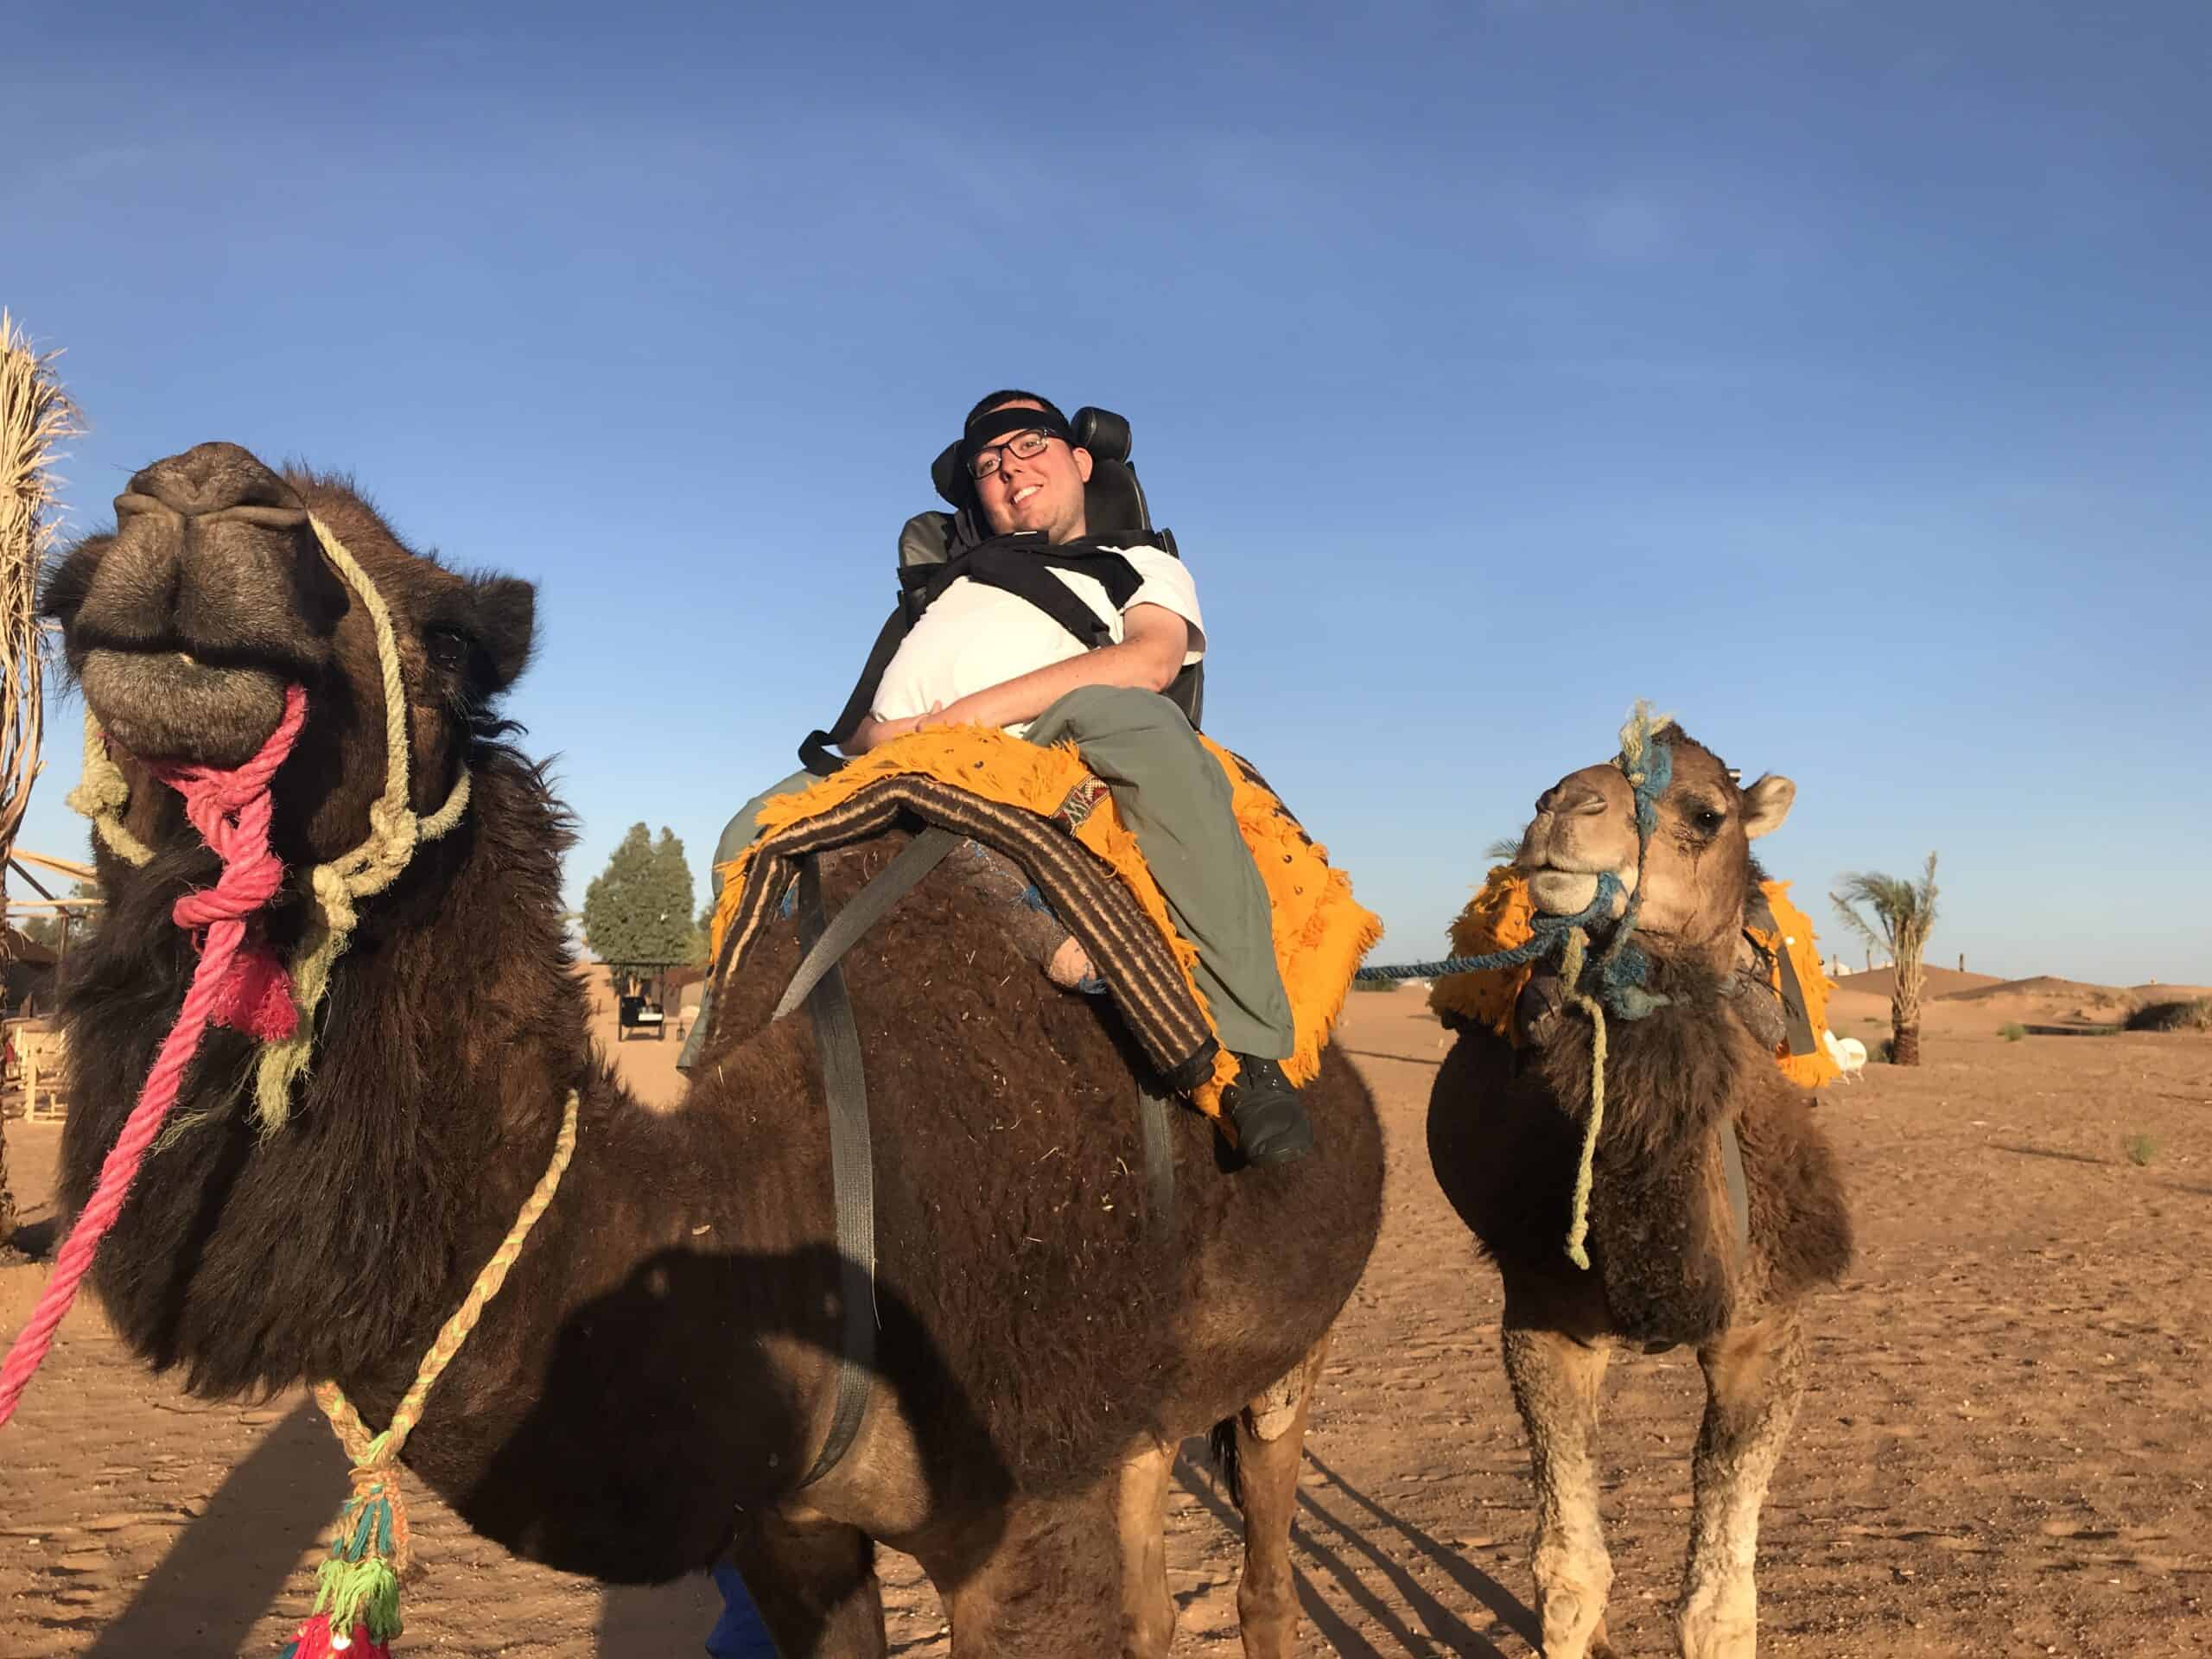 Accessible Travel with Cory Lee - On a camel in Morocco